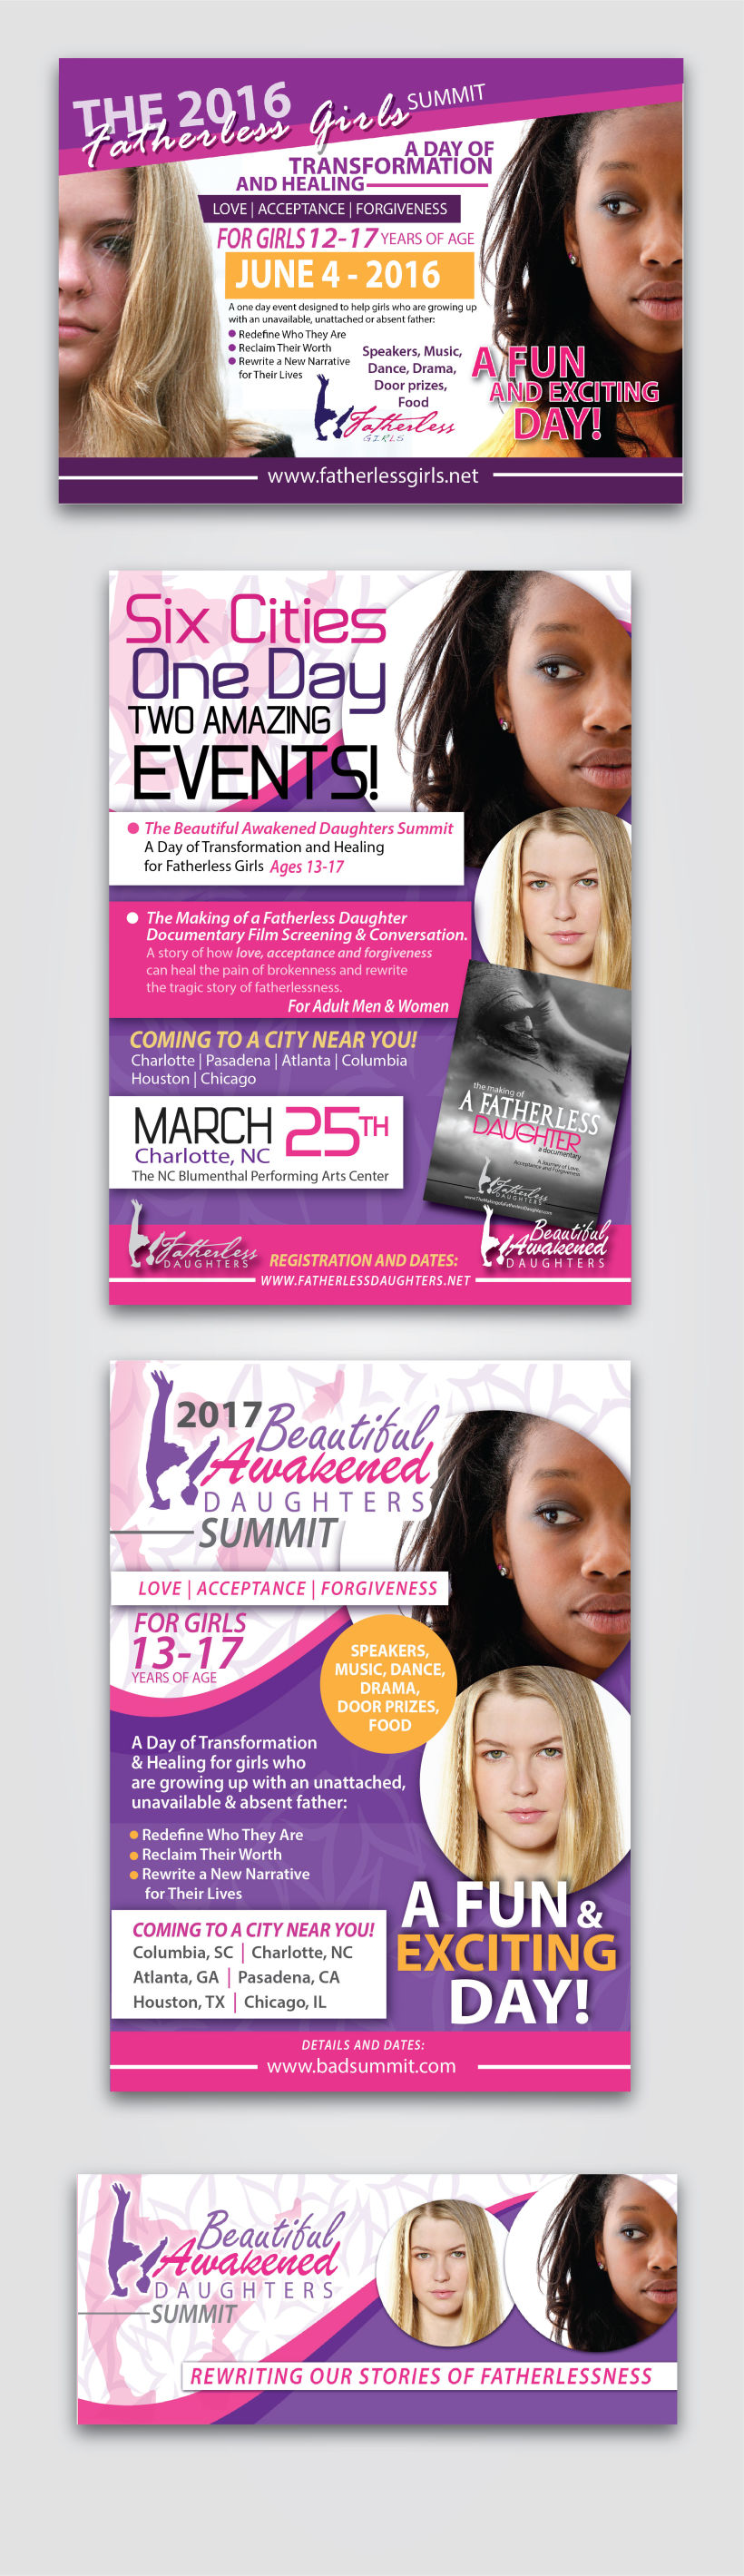 [FLYERS & BANNERS] Angela Carr Patterson  -1